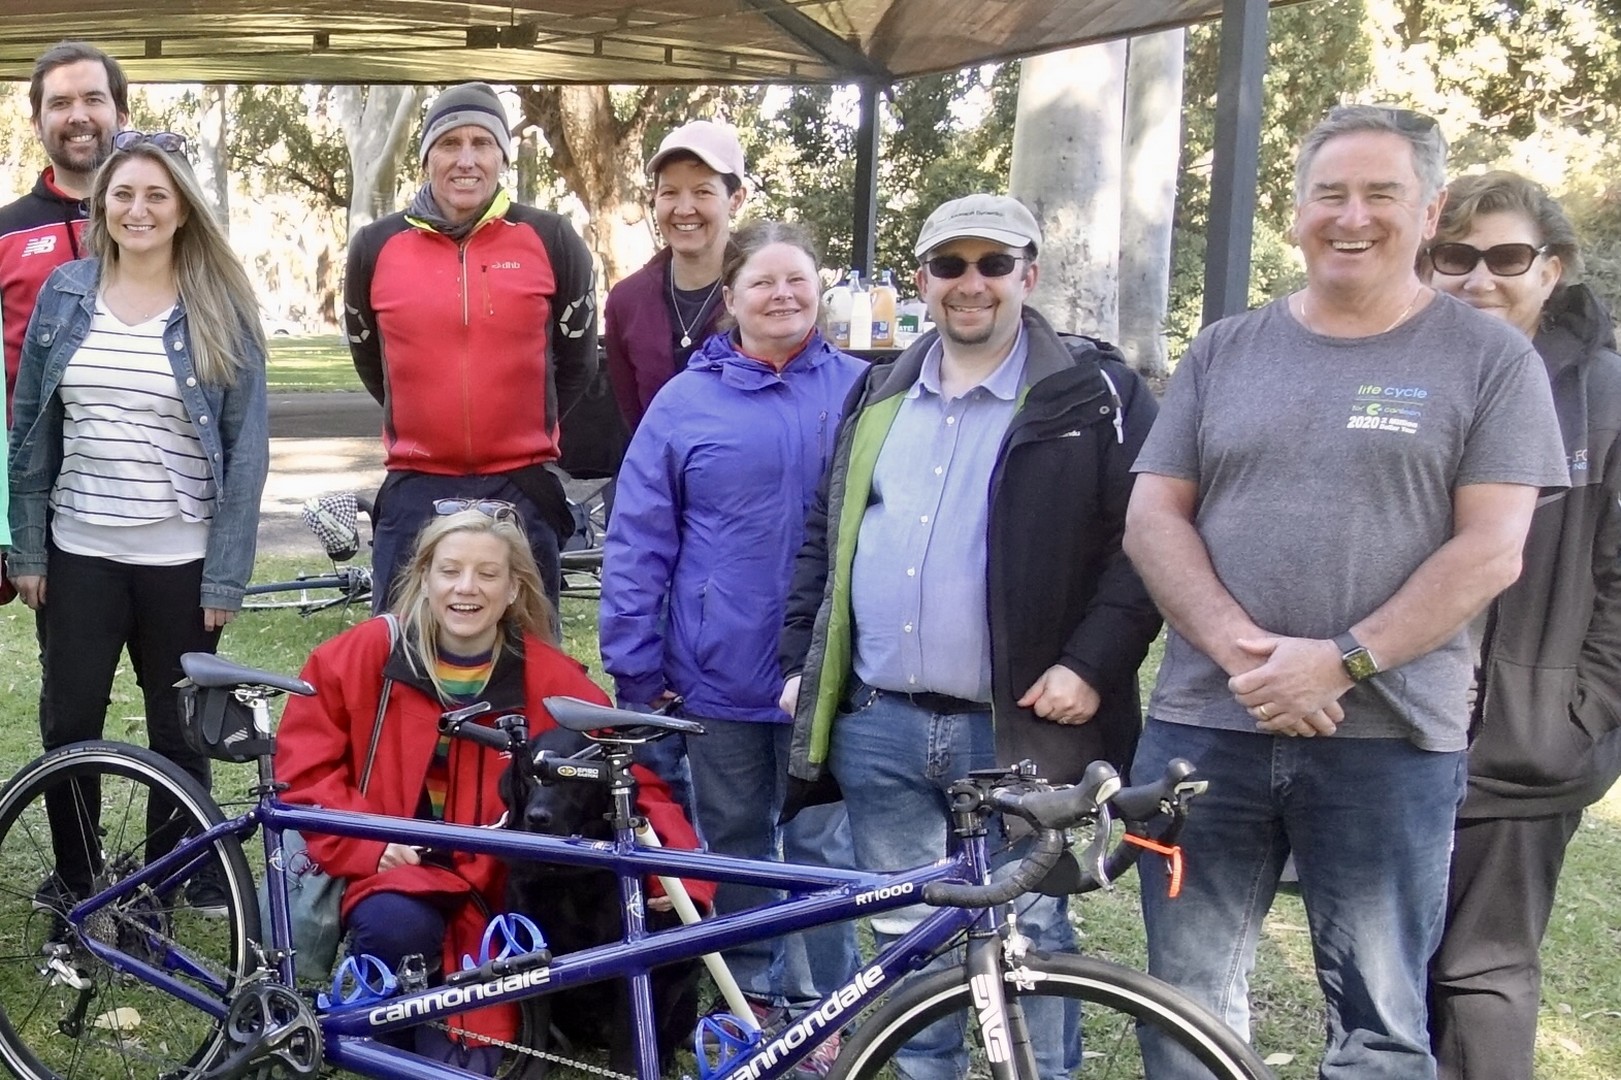 Another group photo in front of a blue tandem, including many of our volunteers involved in fundraising, tandem clinics and our general riding programs.